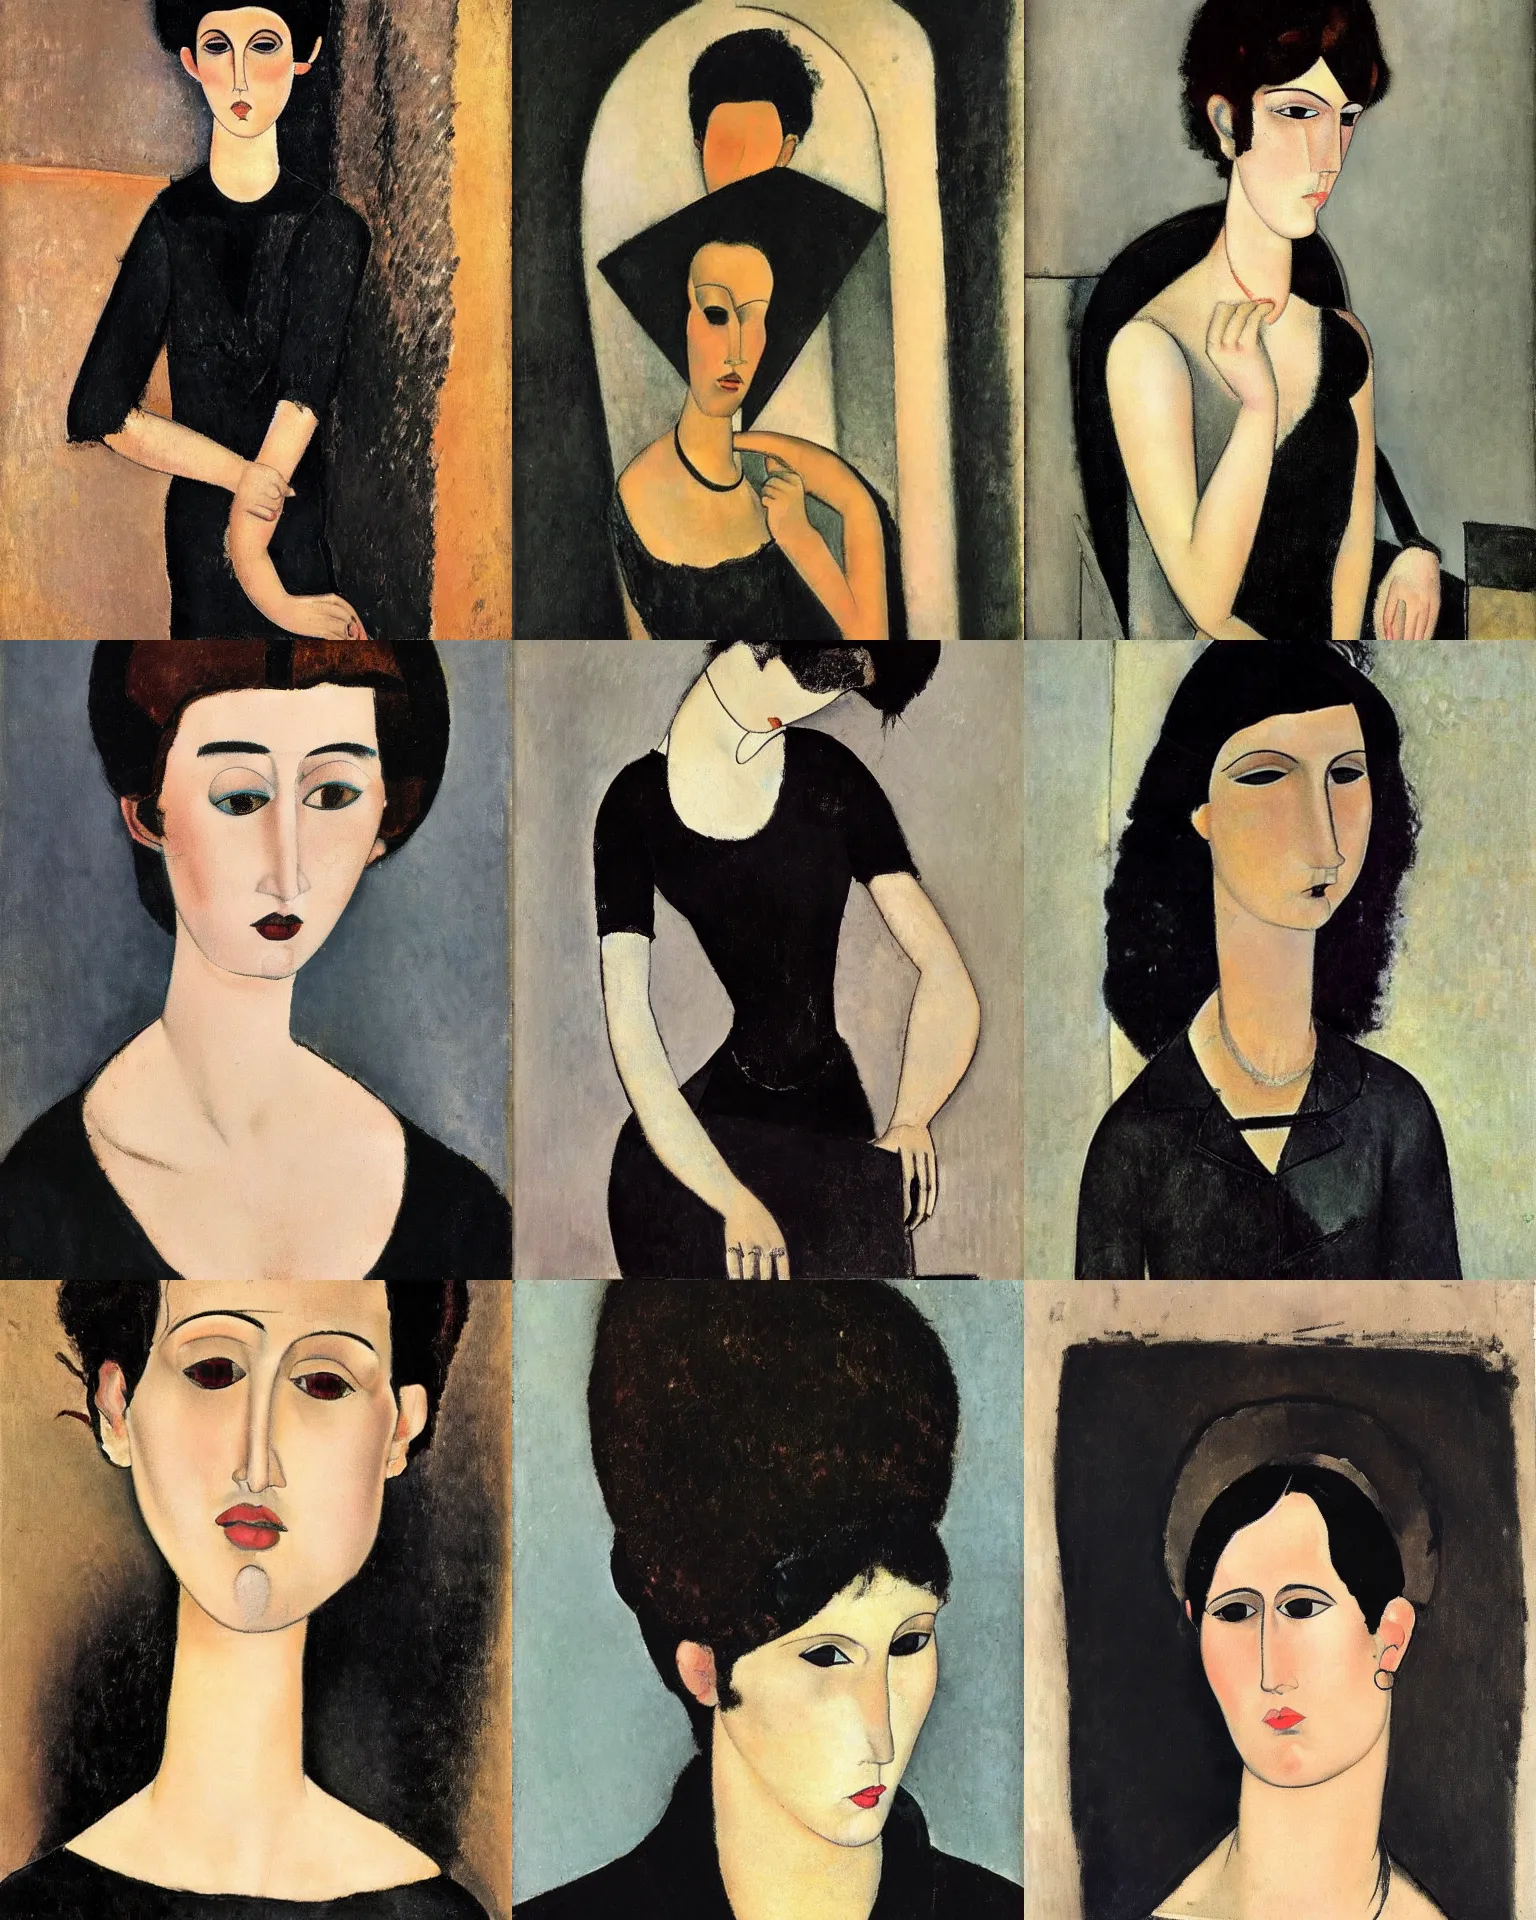 Prompt: A goth portrait by Amedeo Modigliani. Her hair is dark brown and cut into a short, messy pixie cut. She has a slightly rounded face, with a pointed chin, large entirely-black eyes, and a small nose. She is wearing a black tank top, a black leather jacket, a black knee-length skirt, a black choker, and black leather boots.